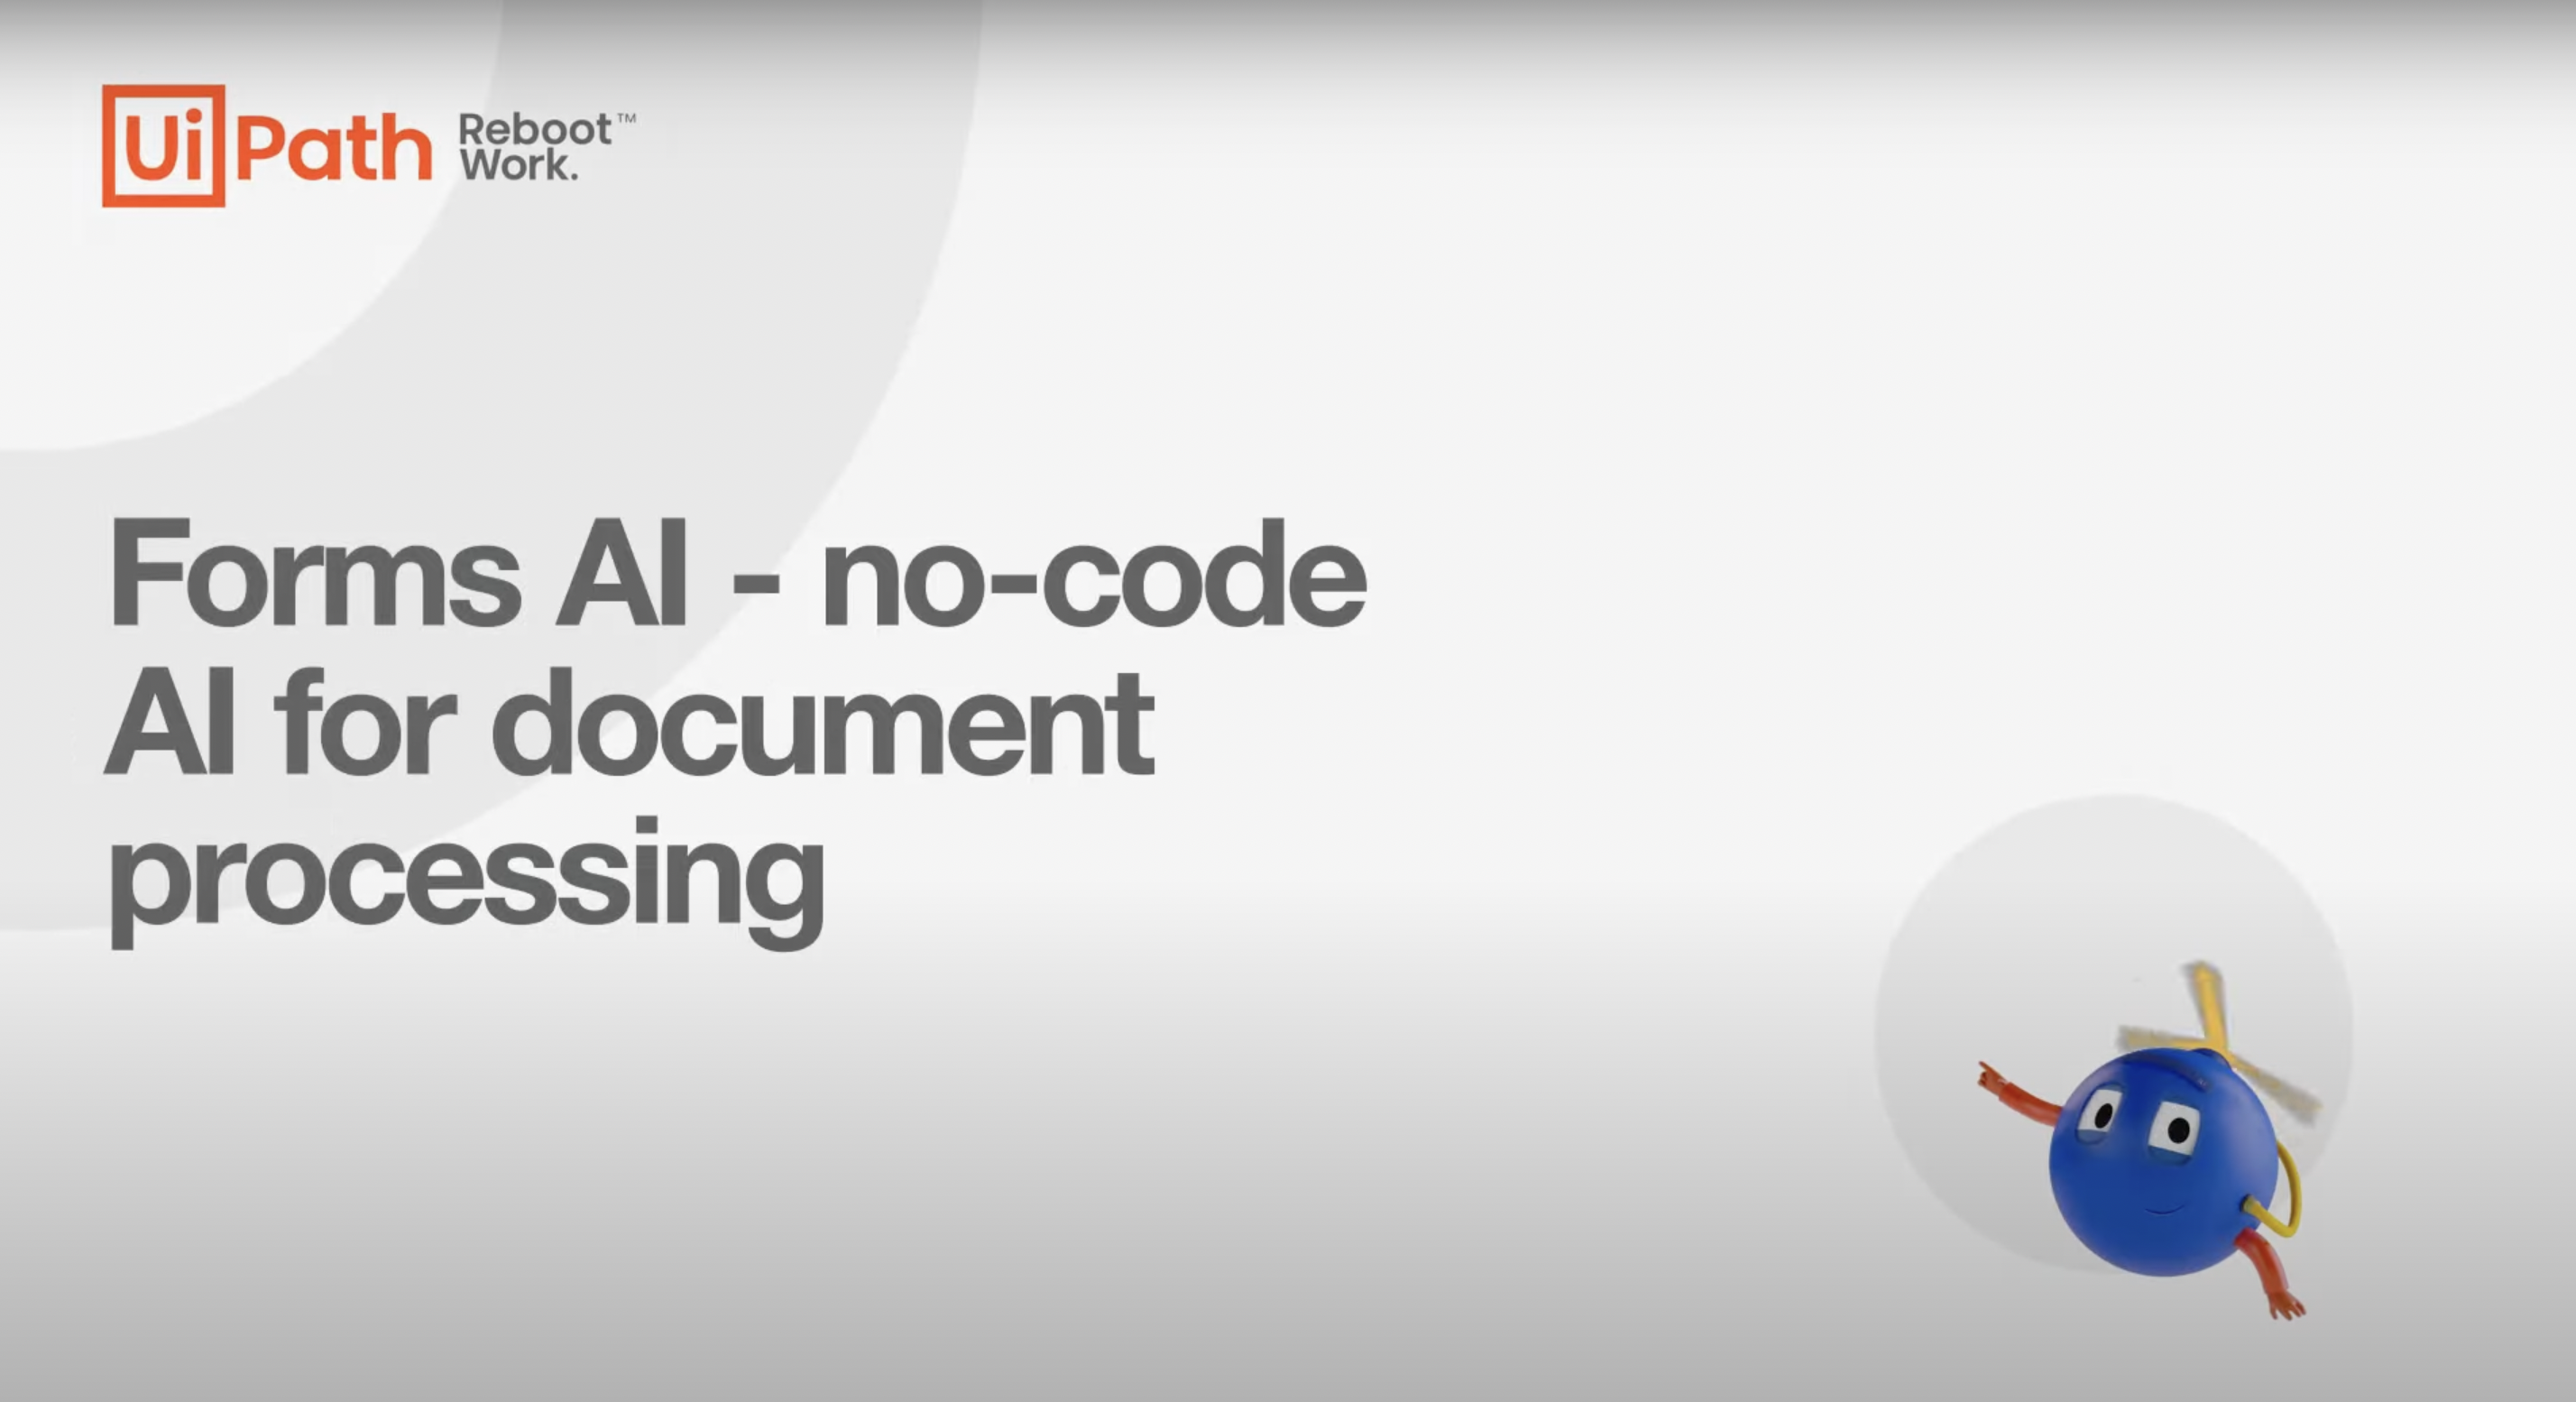 uipath forms ai no code artificial intelligence document processing